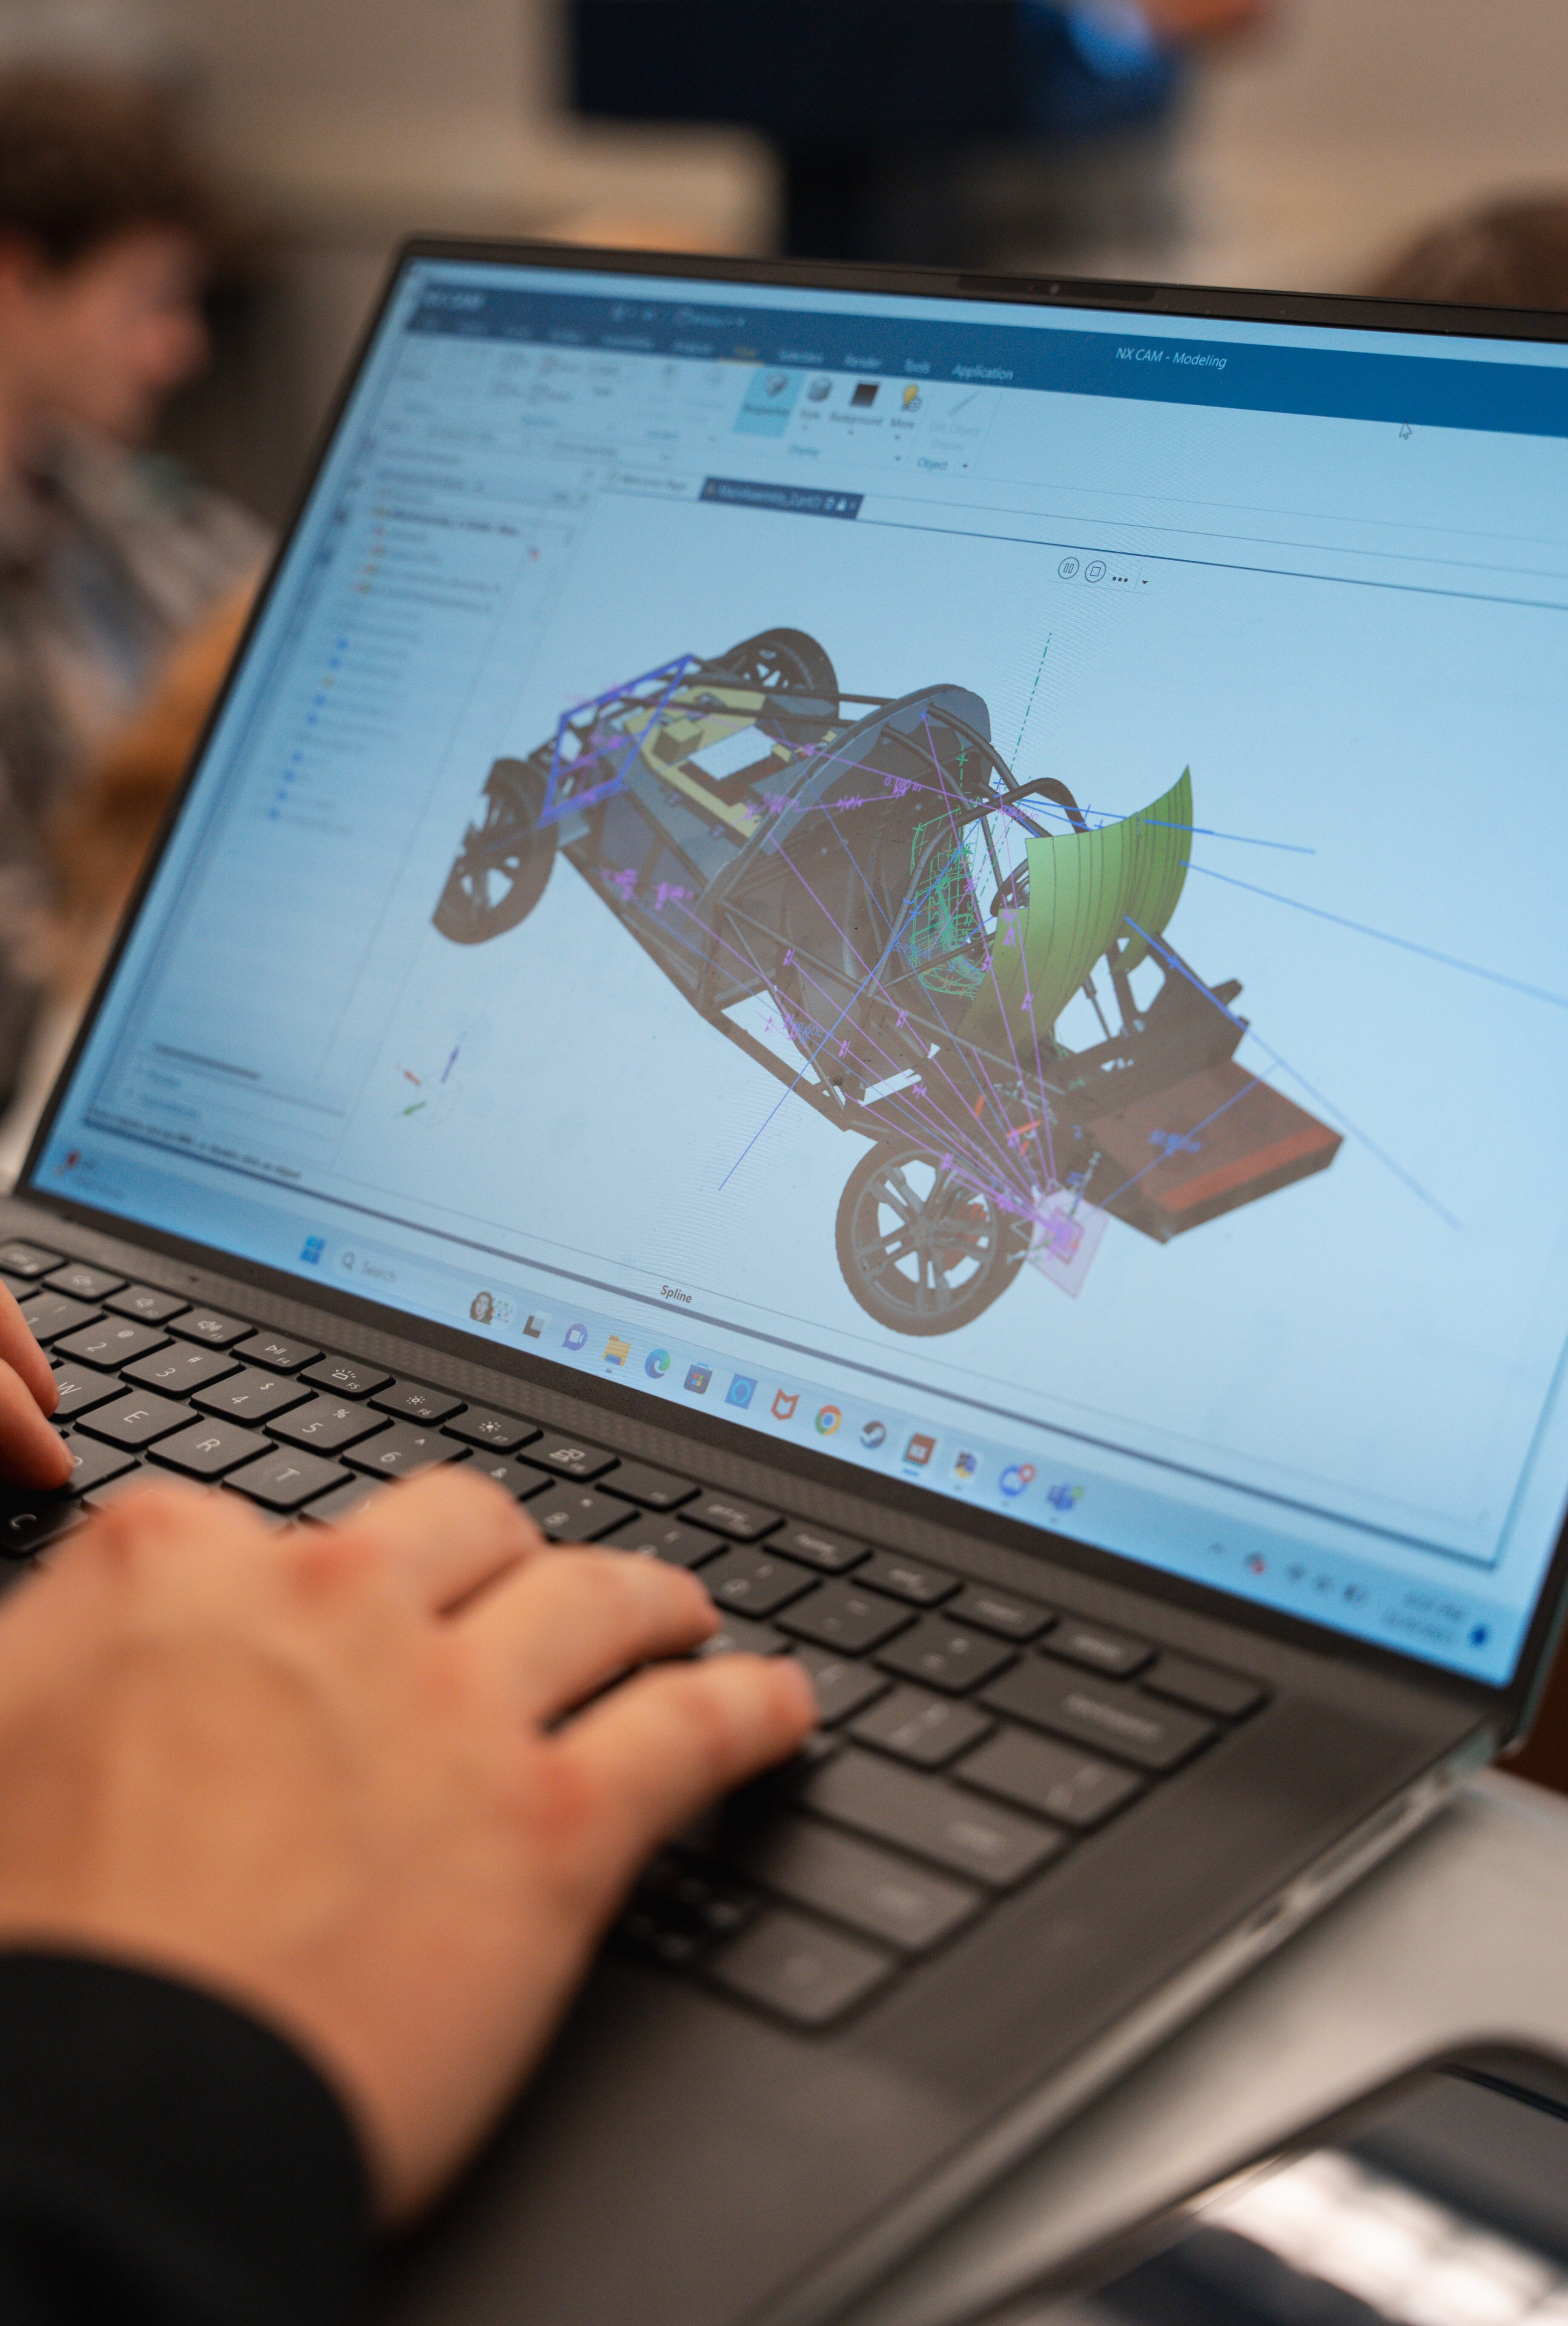 A laptop screen displays the model of the car PROVE is designing